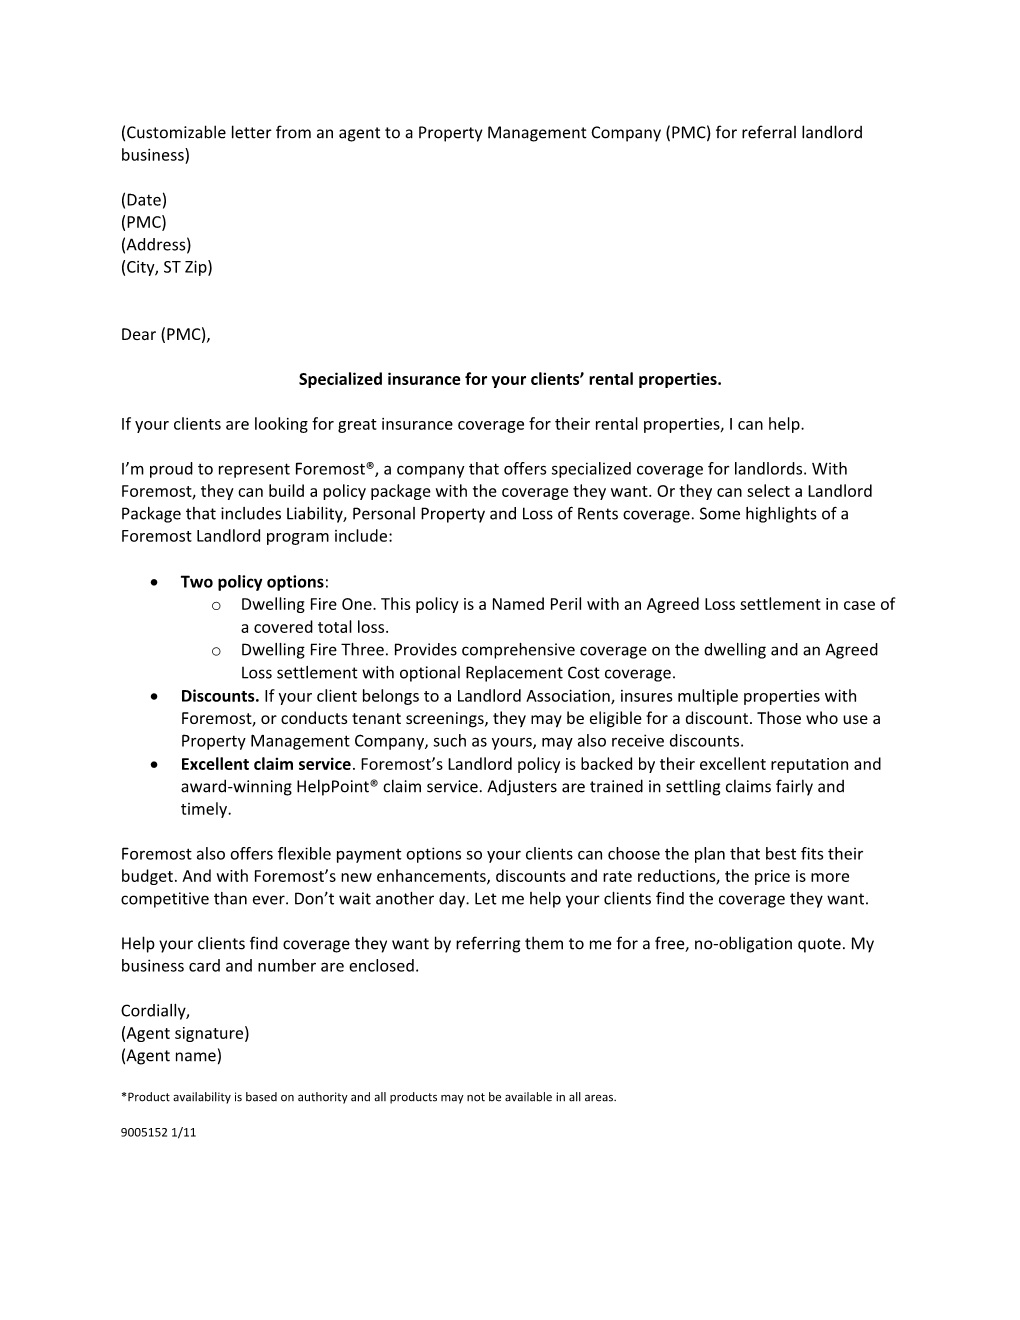 (Customizable Letter from an Agent to a Property Management Company (PMC) for Referral